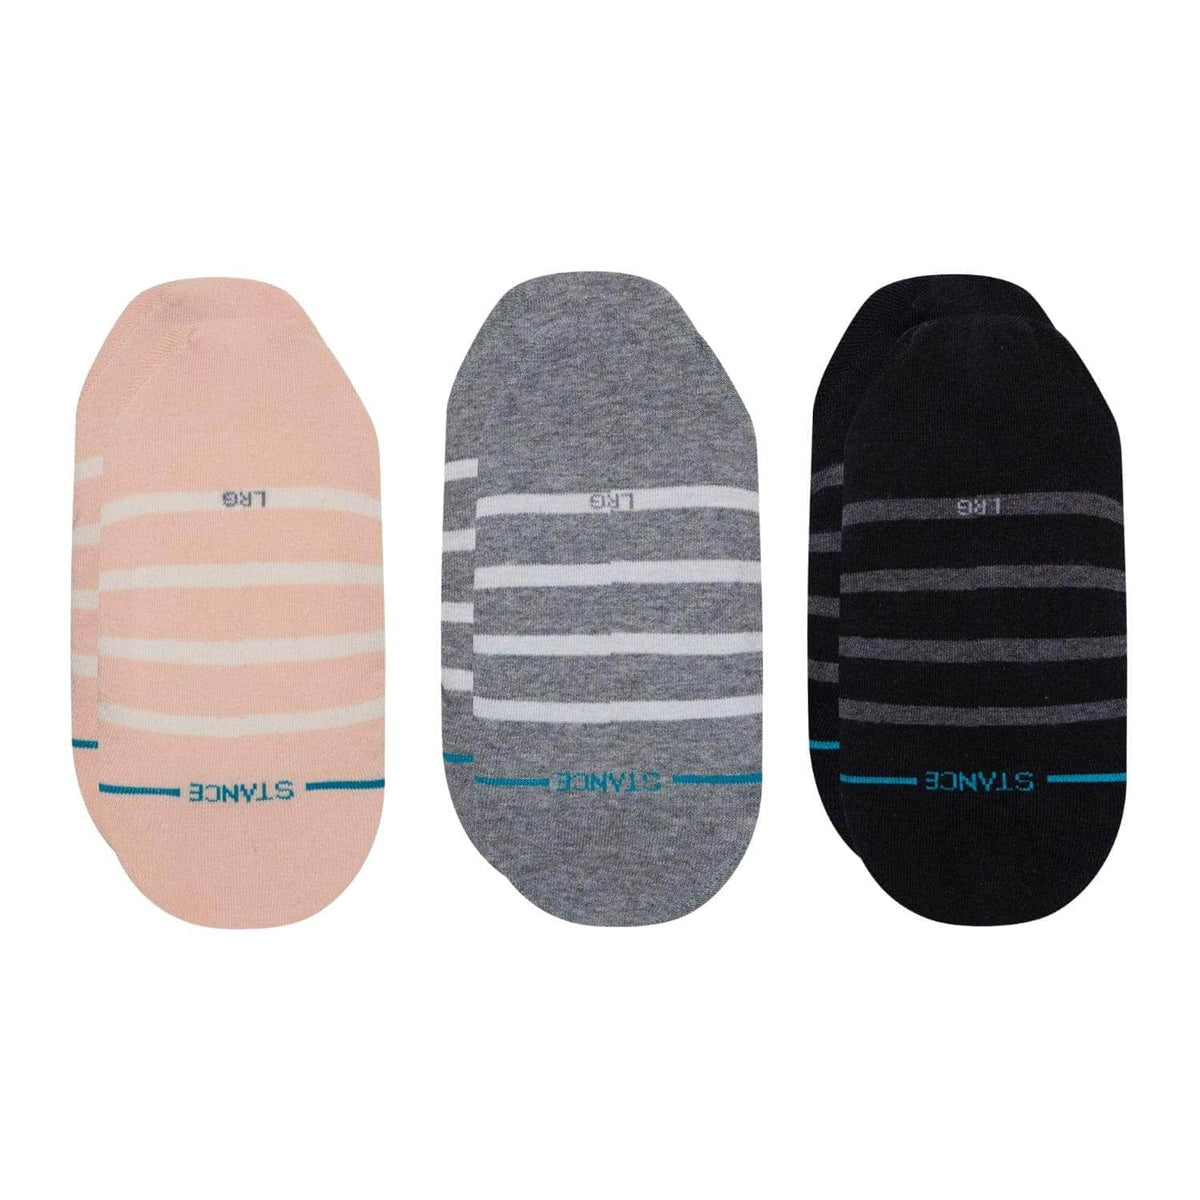 Stance Liner ST 3 Pack Socks Multi - Unisex Invisible/No Show Socks by Stance